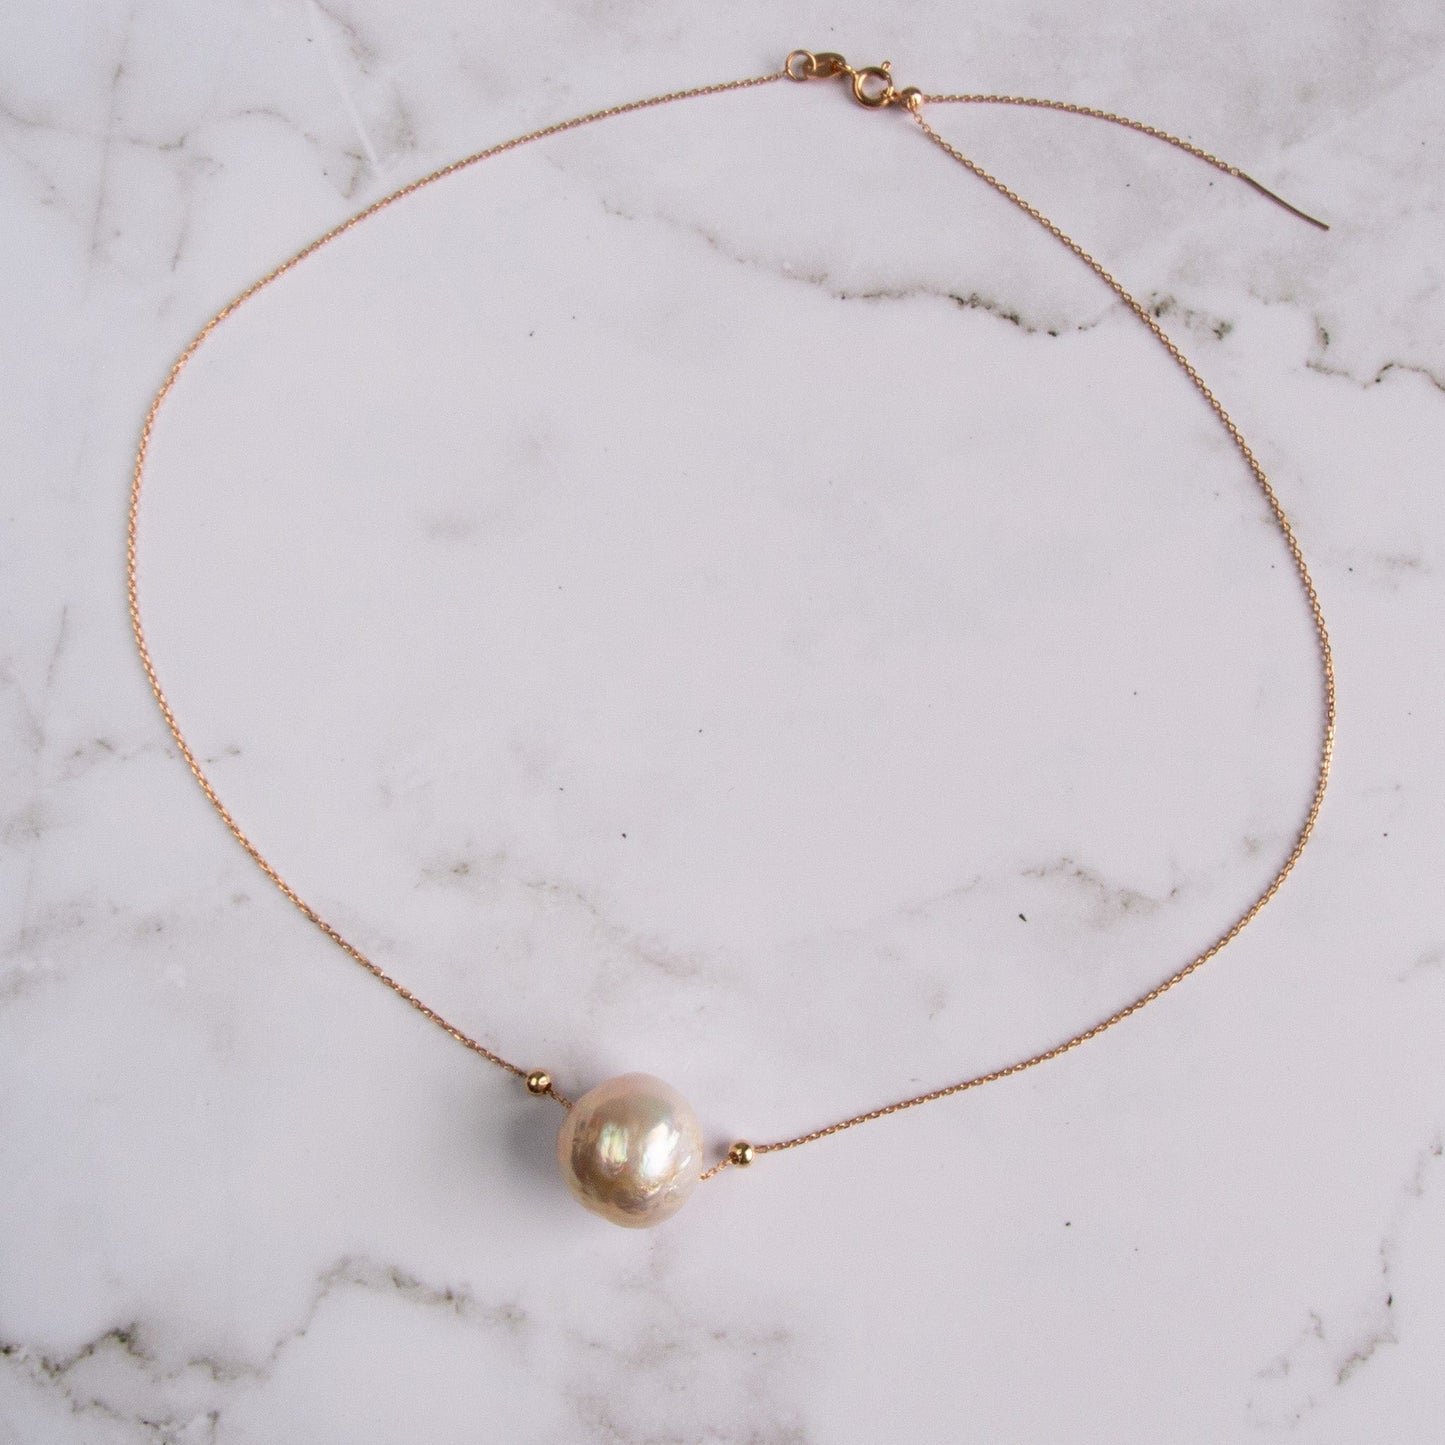 Arbor Trading Post Necklaces Handcrafted Large Freshwater Cultured Baroque Pearl Rose Gold Necklace